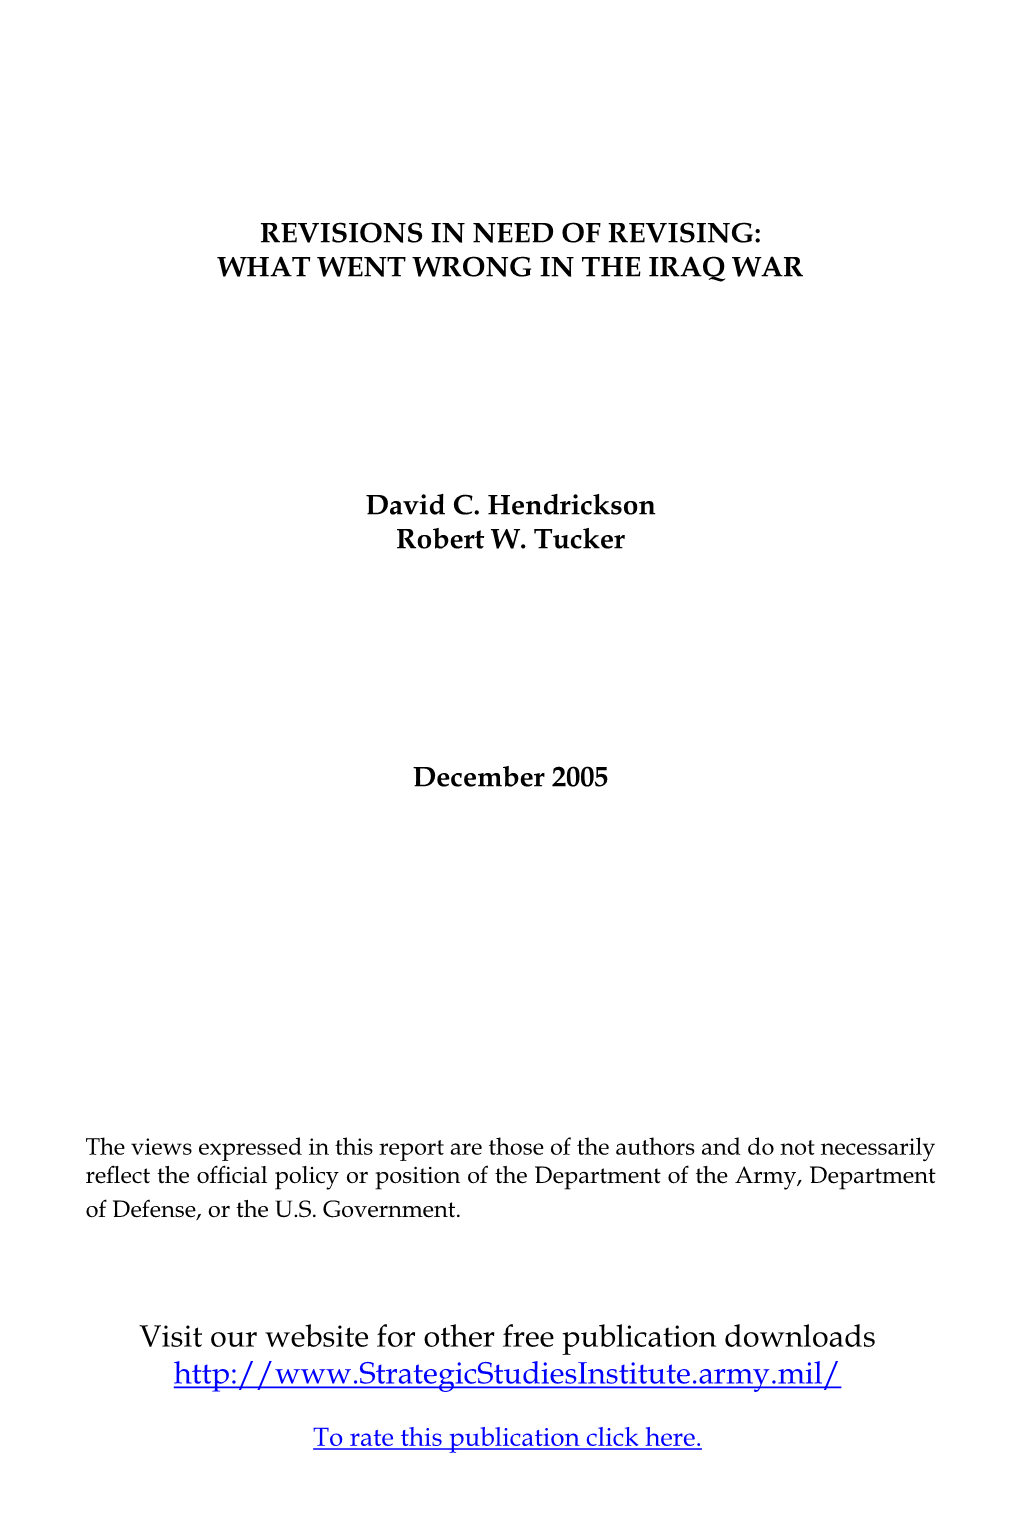 Revisions in Need of Revising: What Went Wrong in the Iraq War